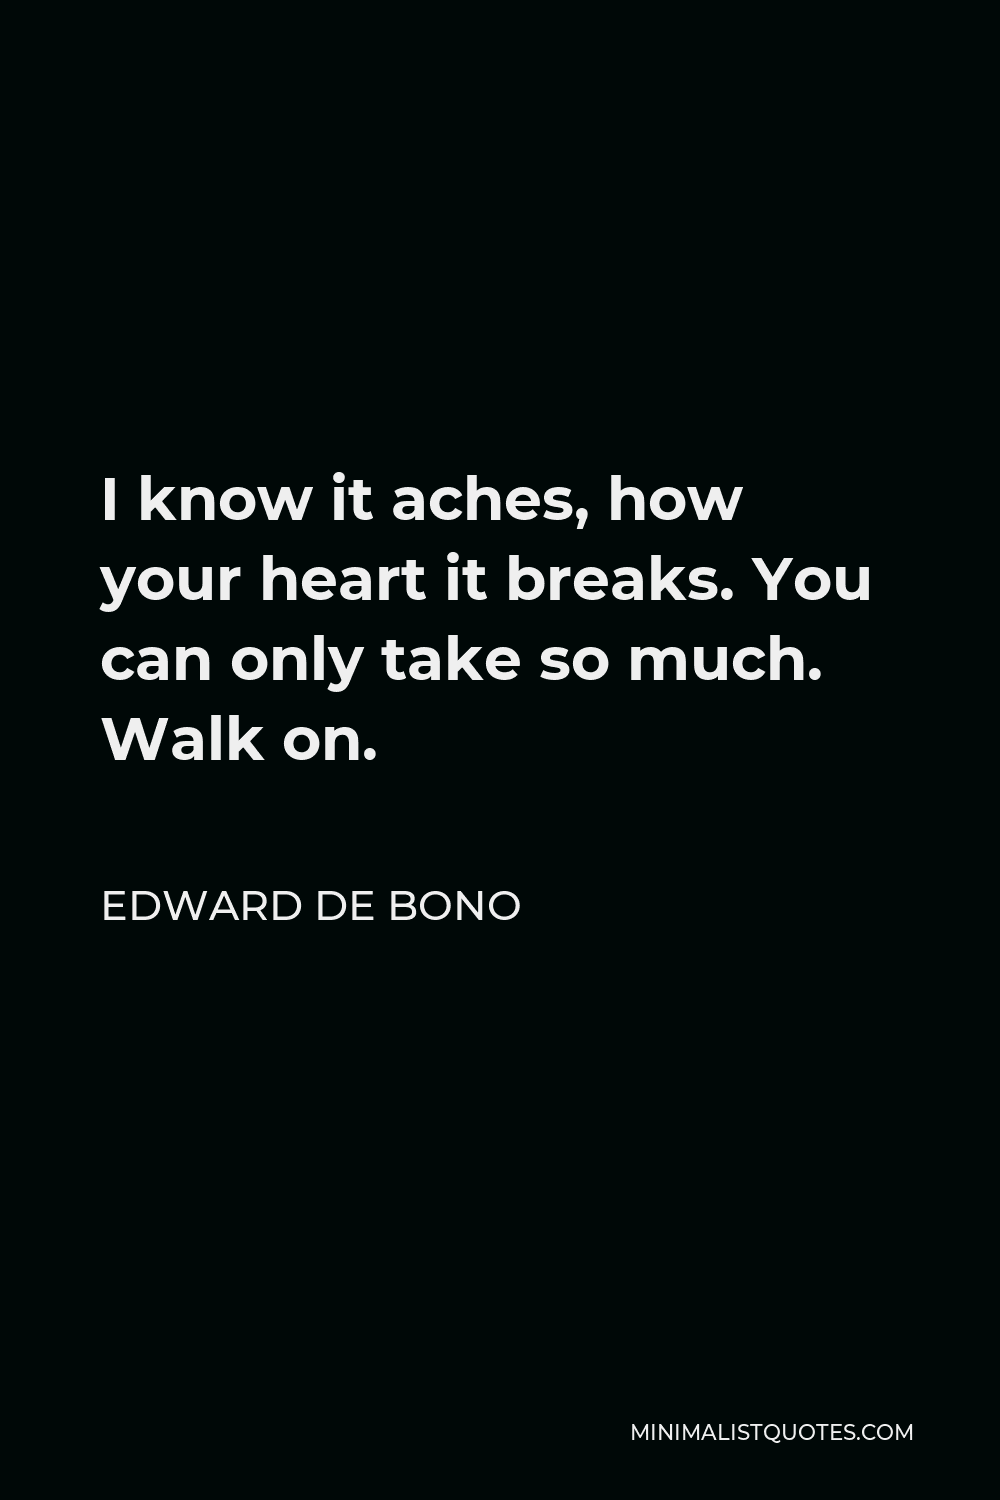 Edward de Bono Quote - I know it aches, how your heart it breaks. You can only take so much. Walk on.